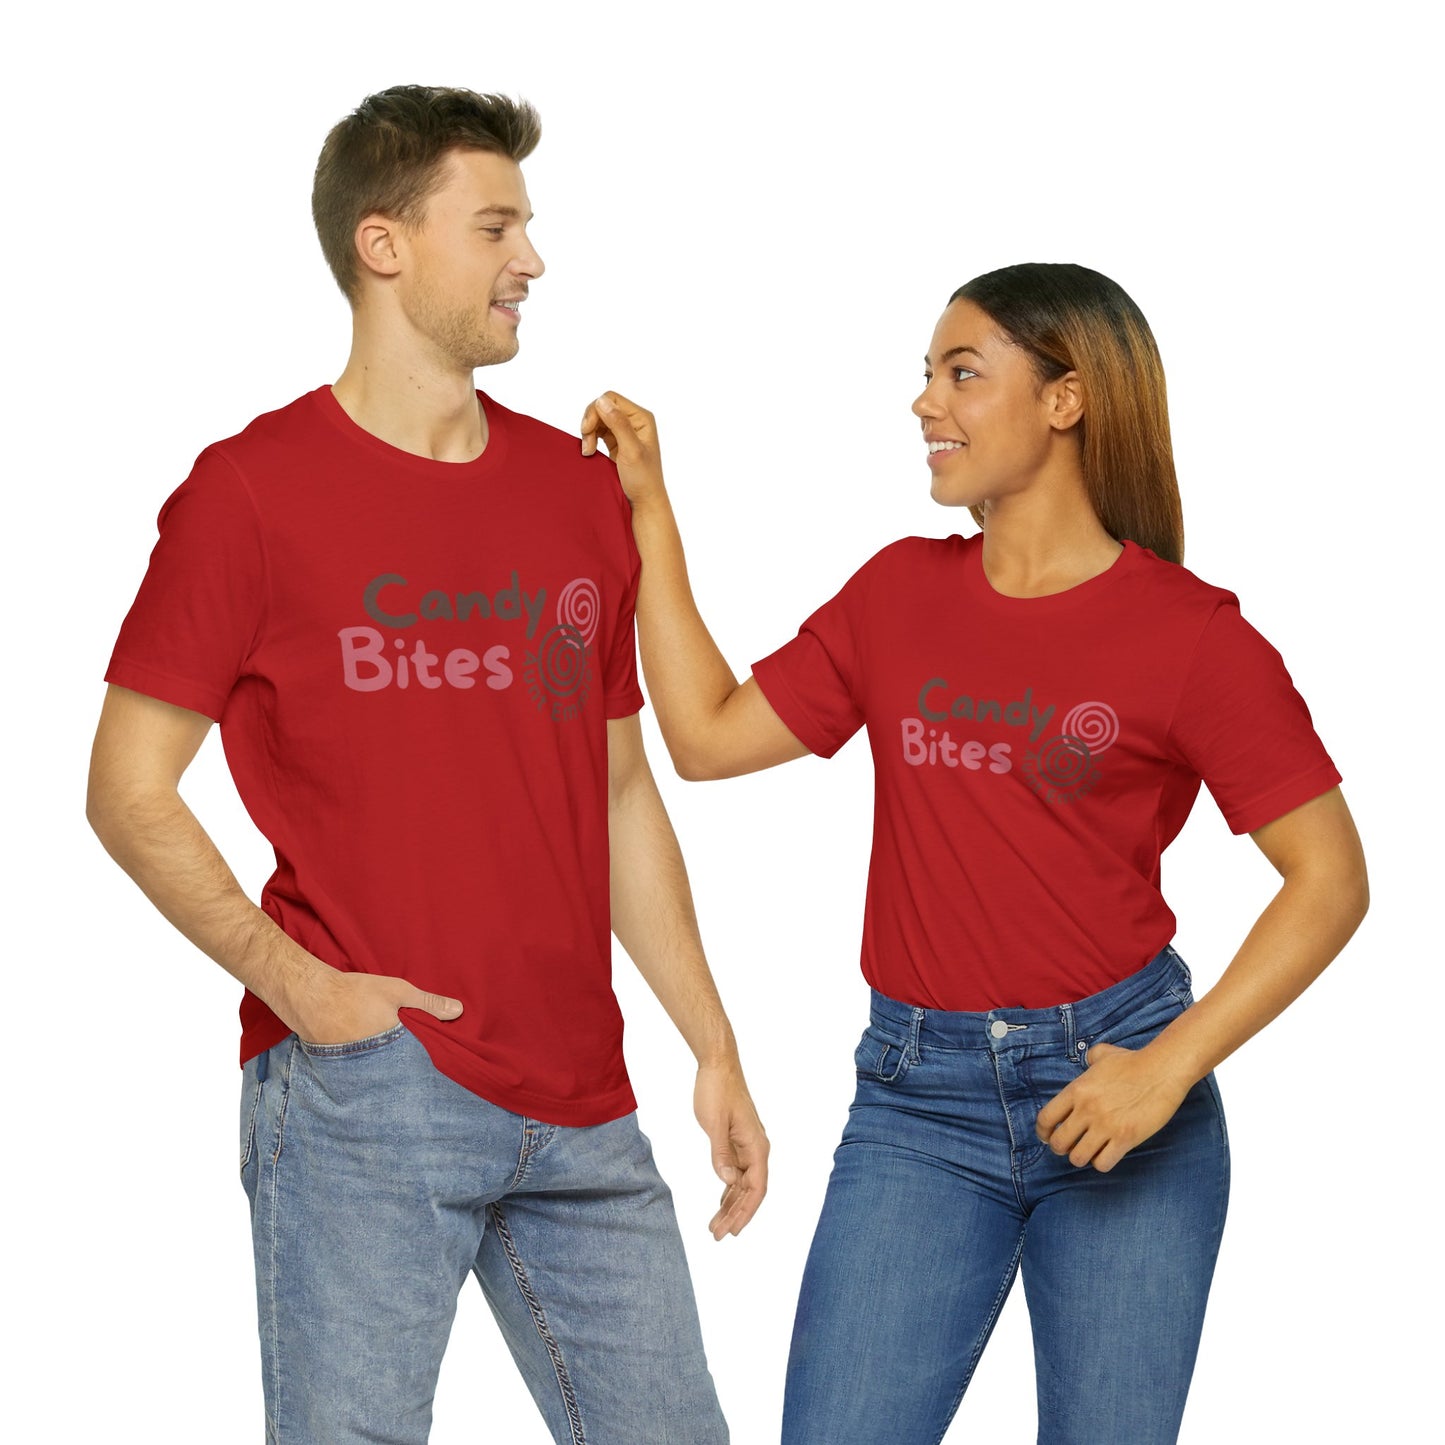 Aunt Emmie's Candy Bites, Jersey Short Sleeve Tee